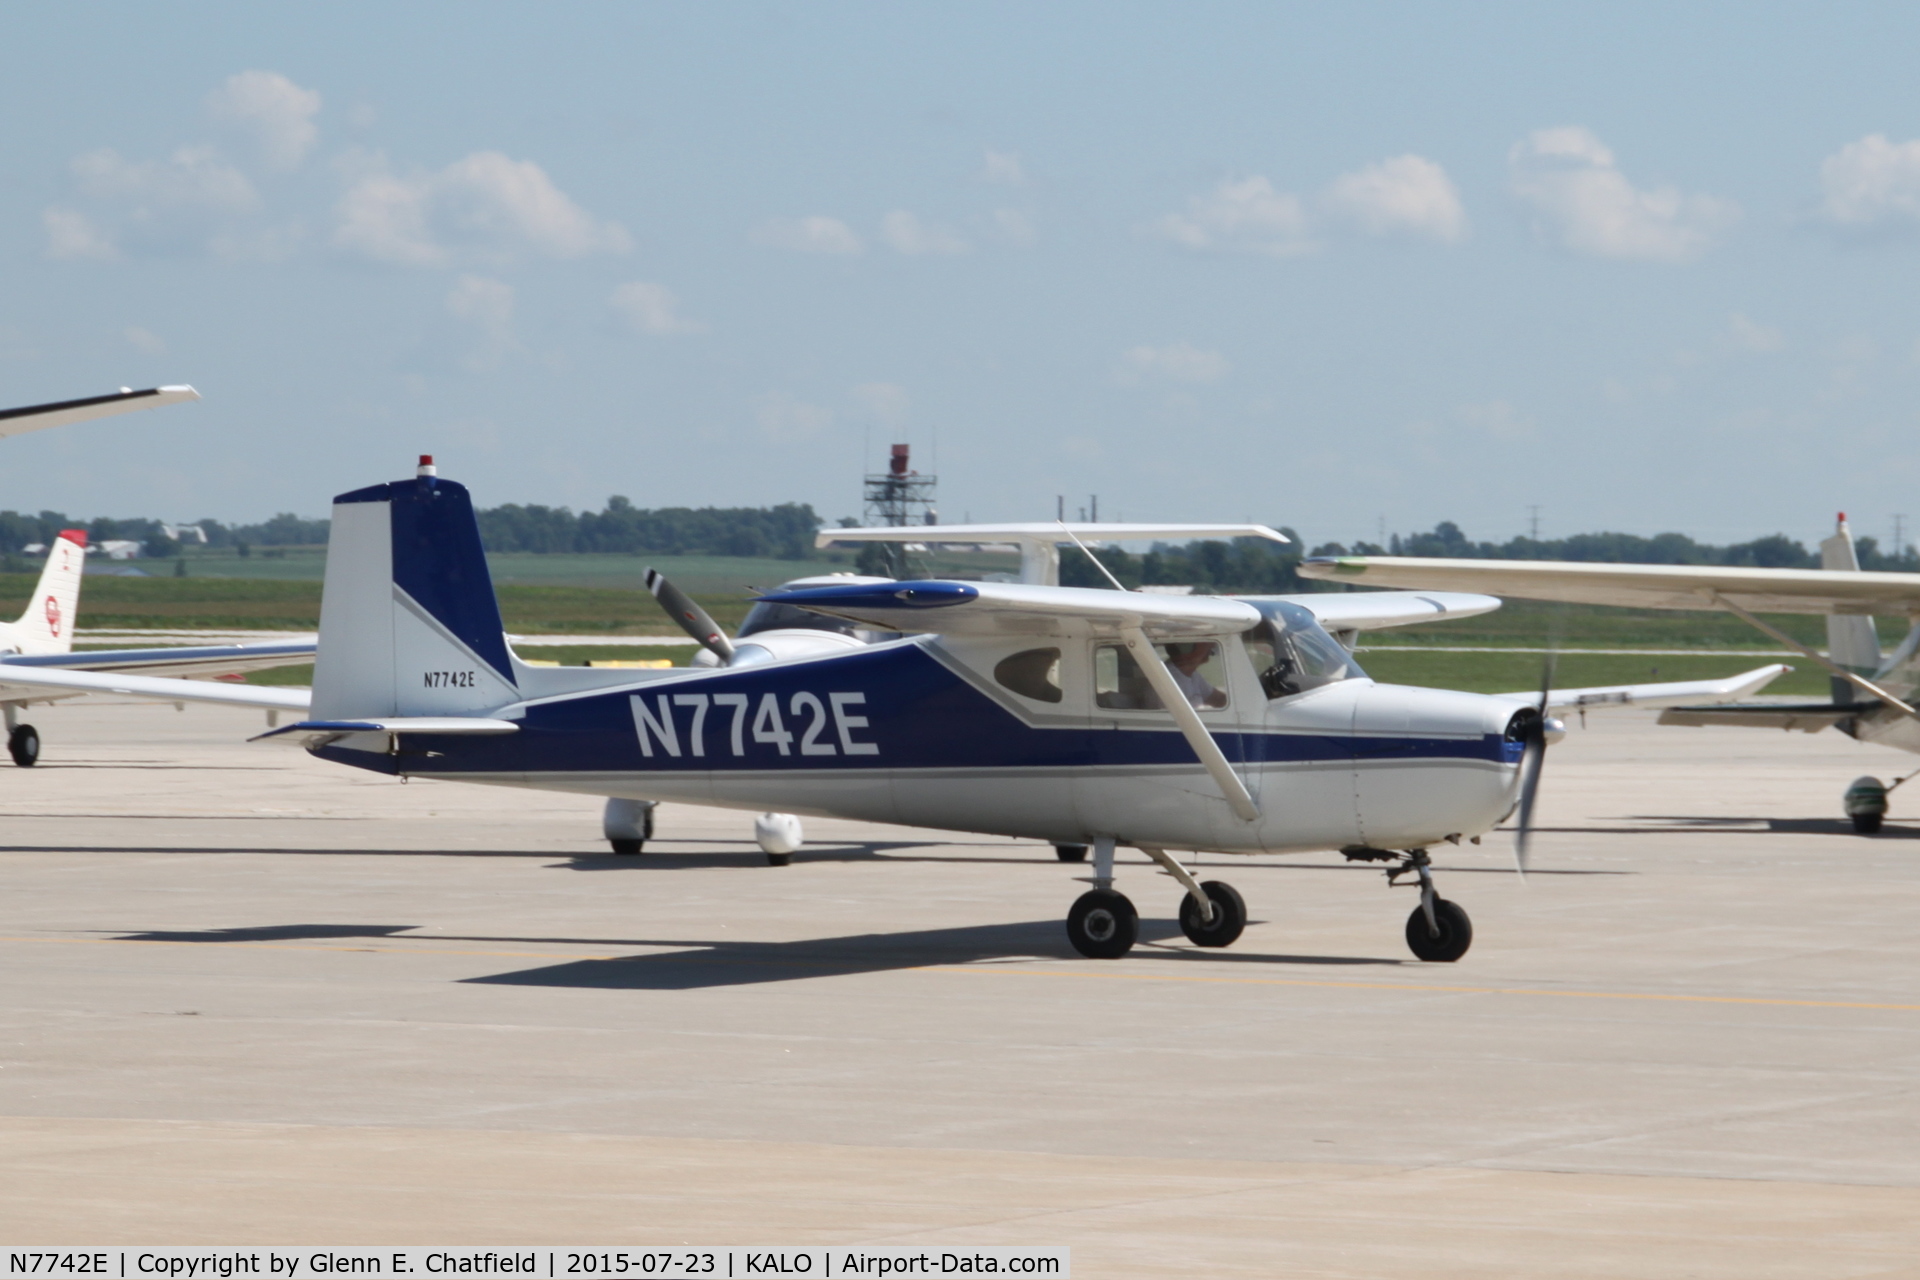 N7742E, 1959 Cessna 150 C/N 17542, Found on the ramp